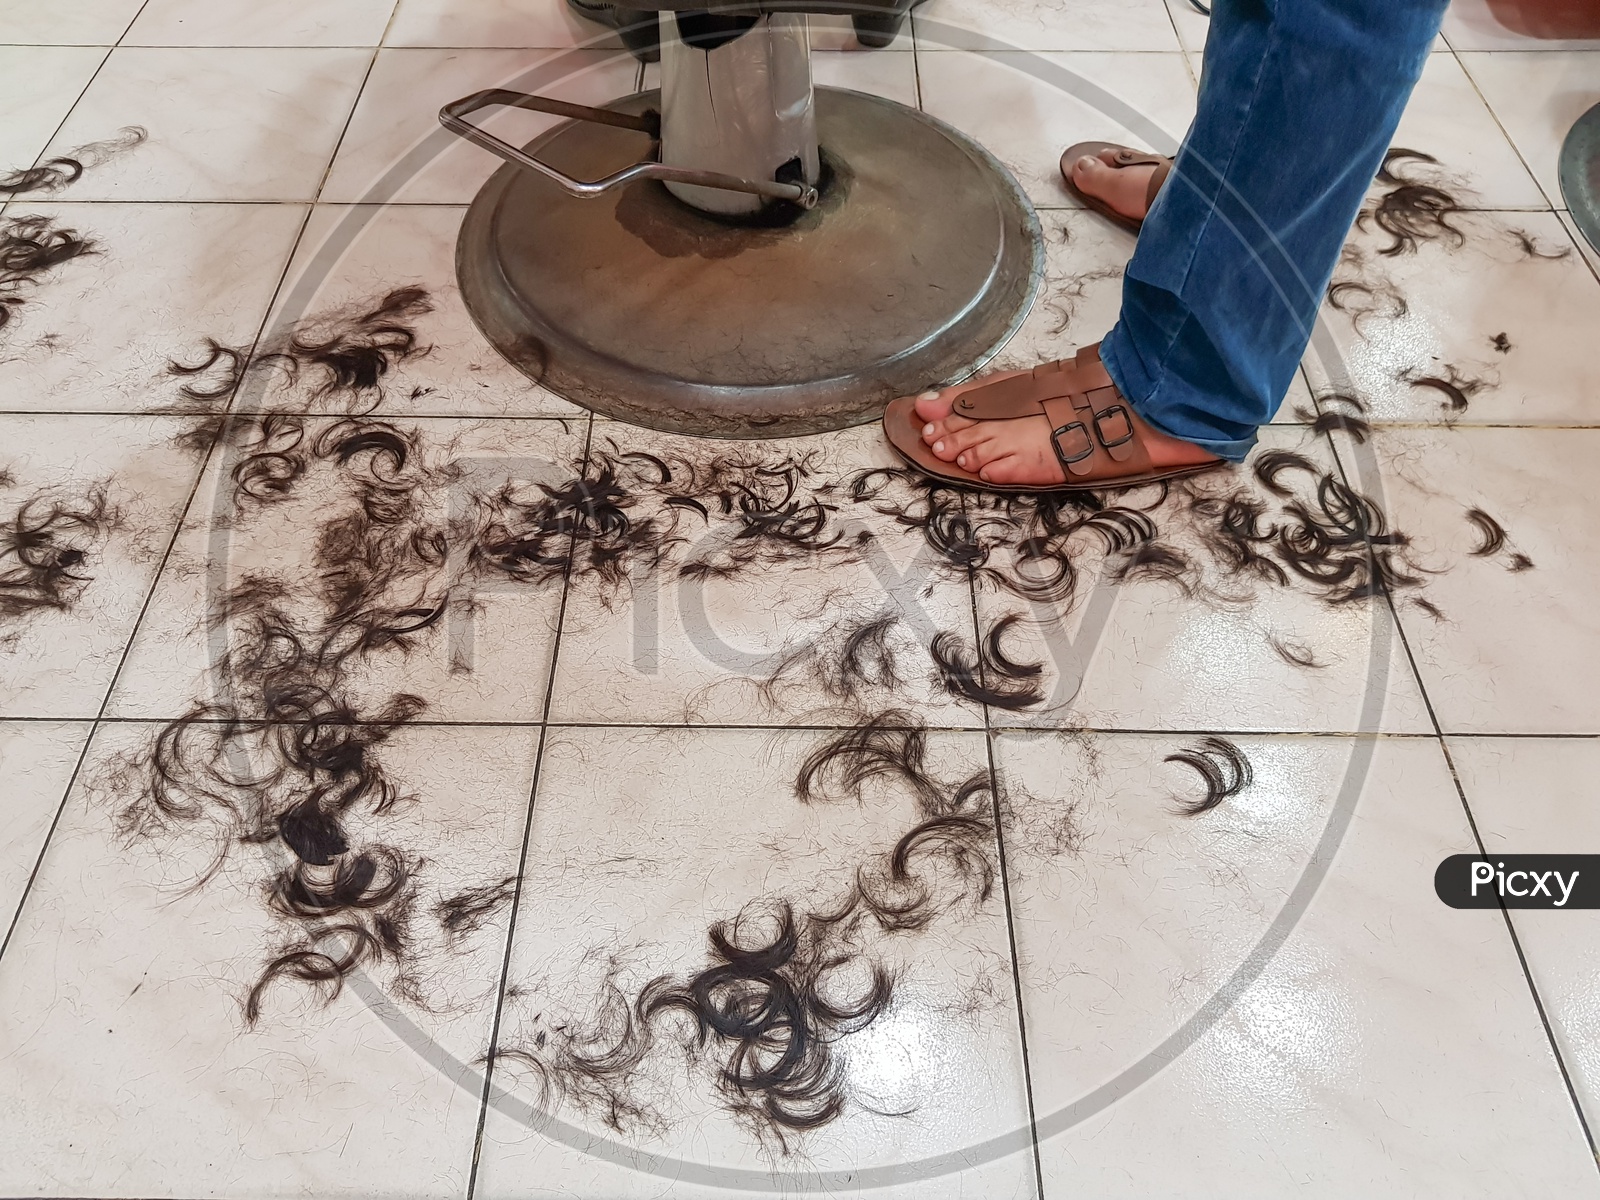 Dirty Floor Of A Hair Salon With Hairs On Floor In Barber Shop